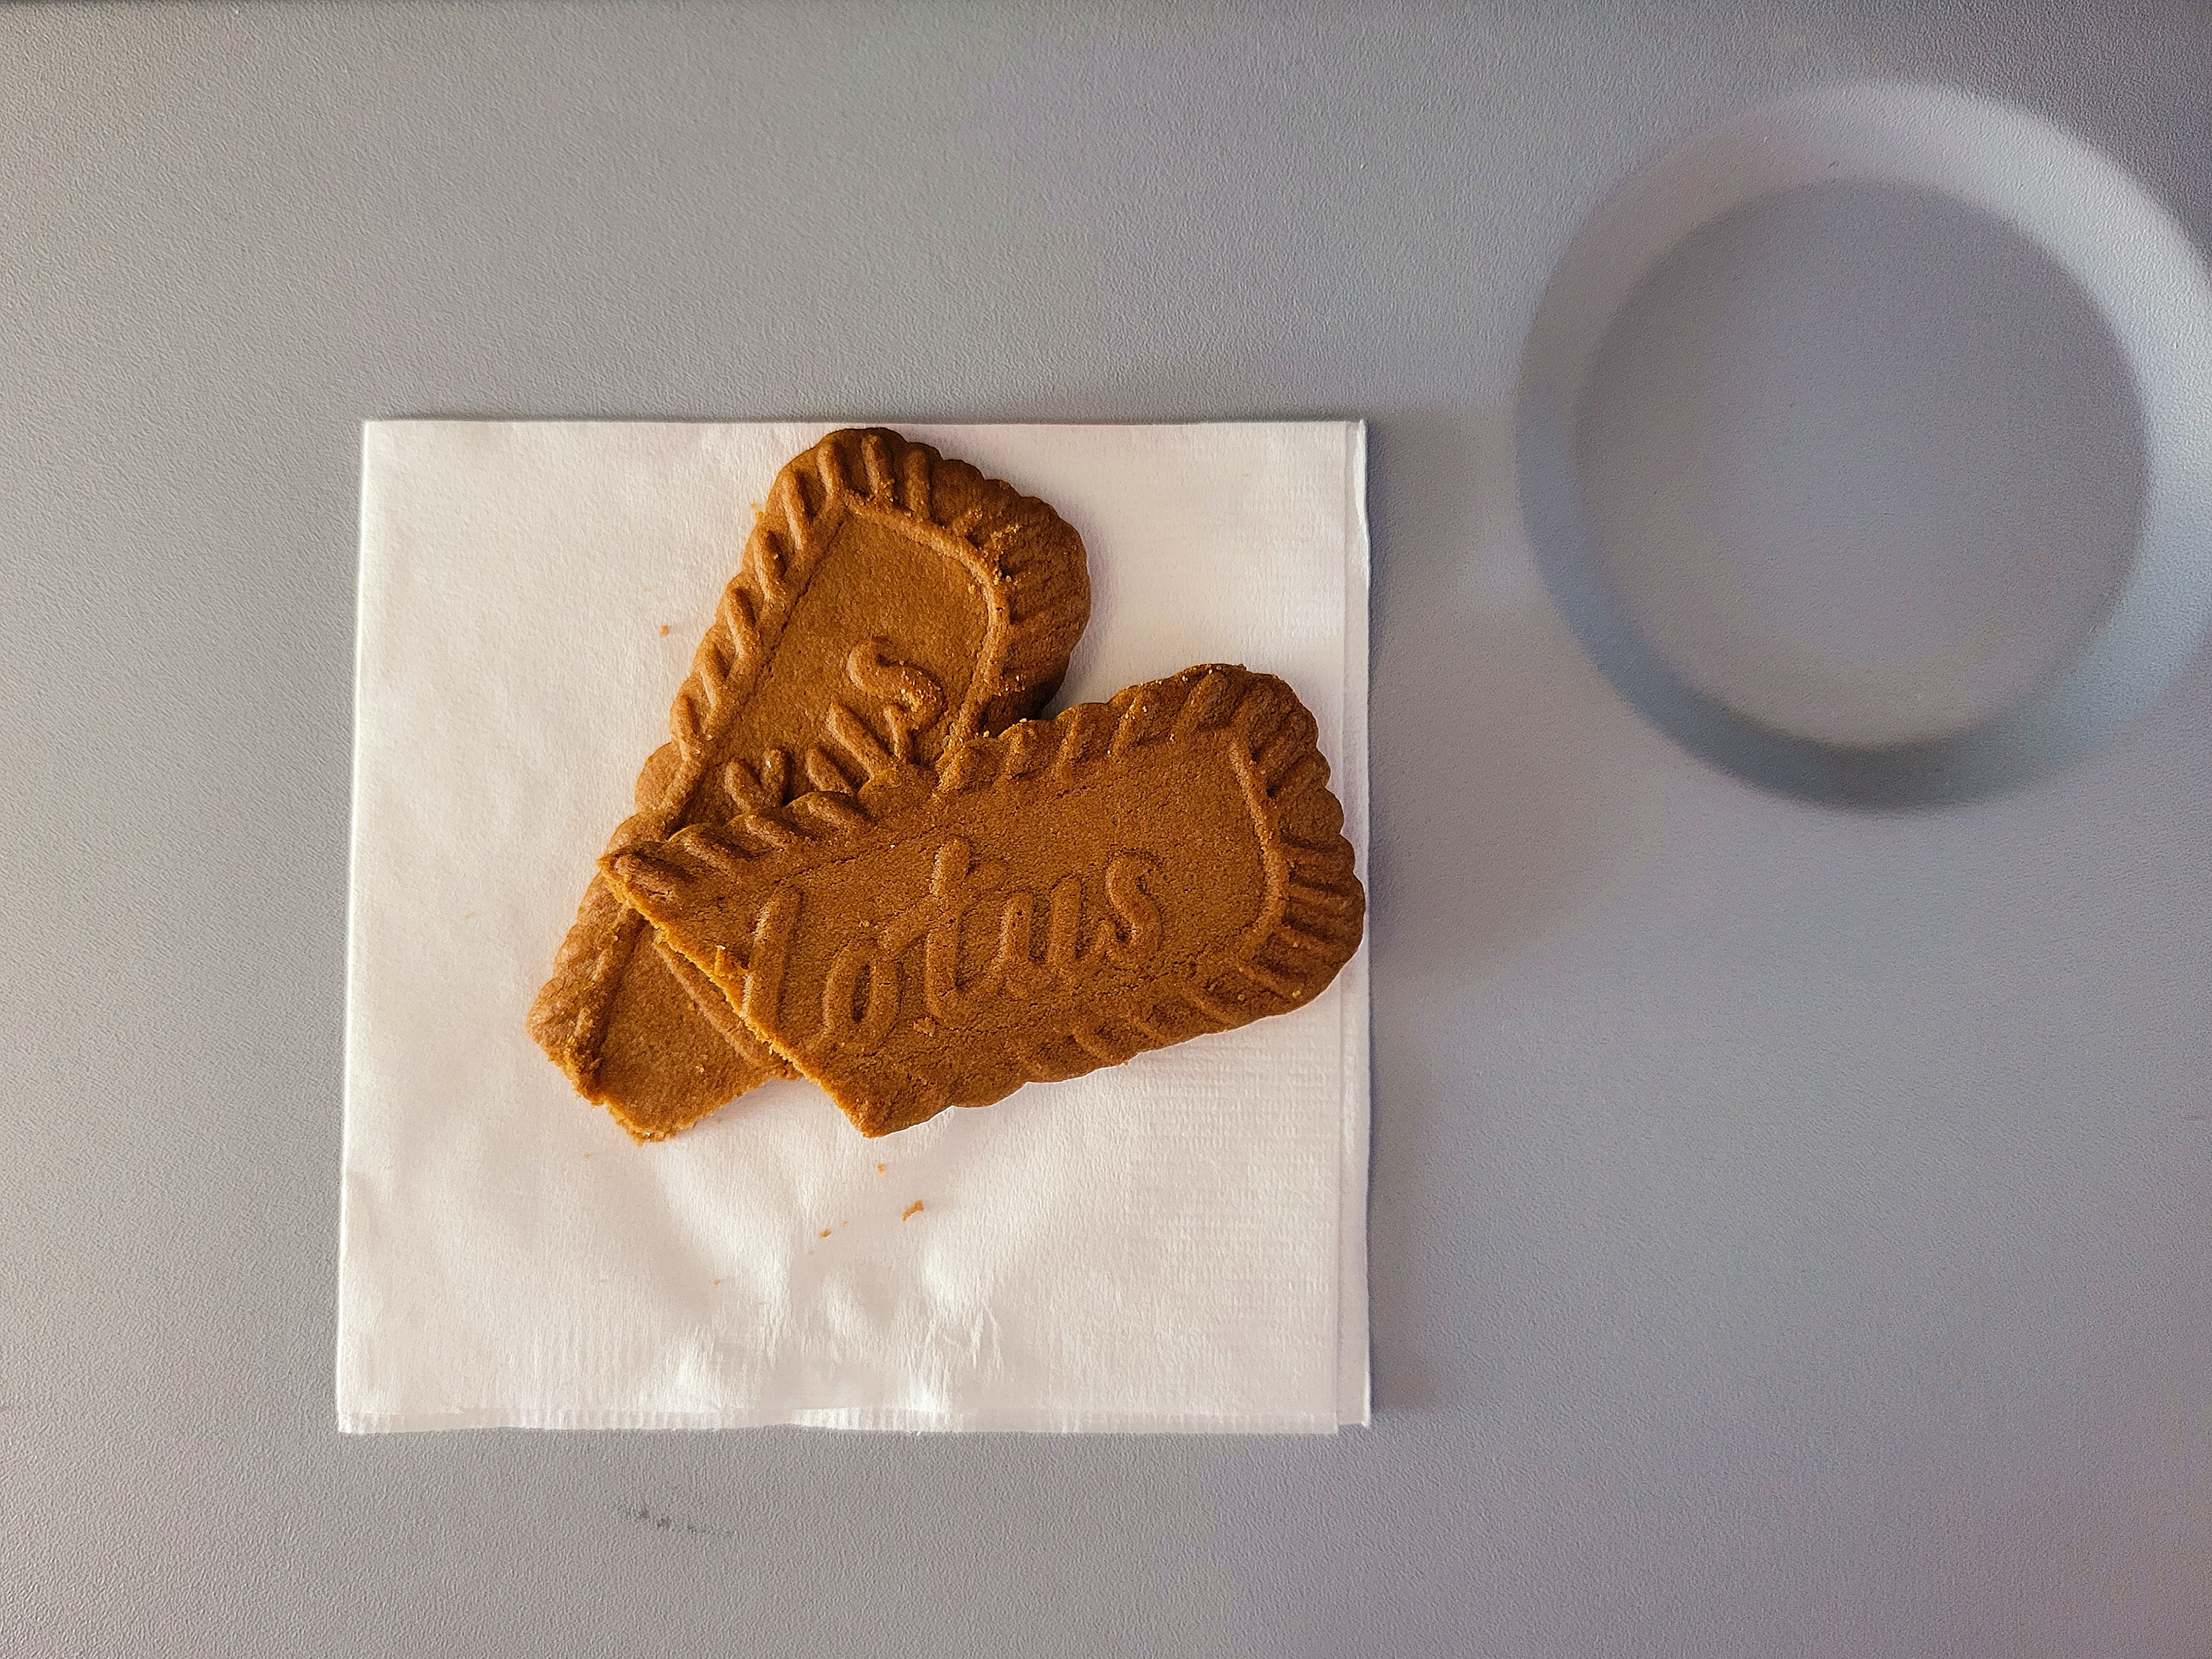 lotus biscoff biscuit on white napkin airline tray table